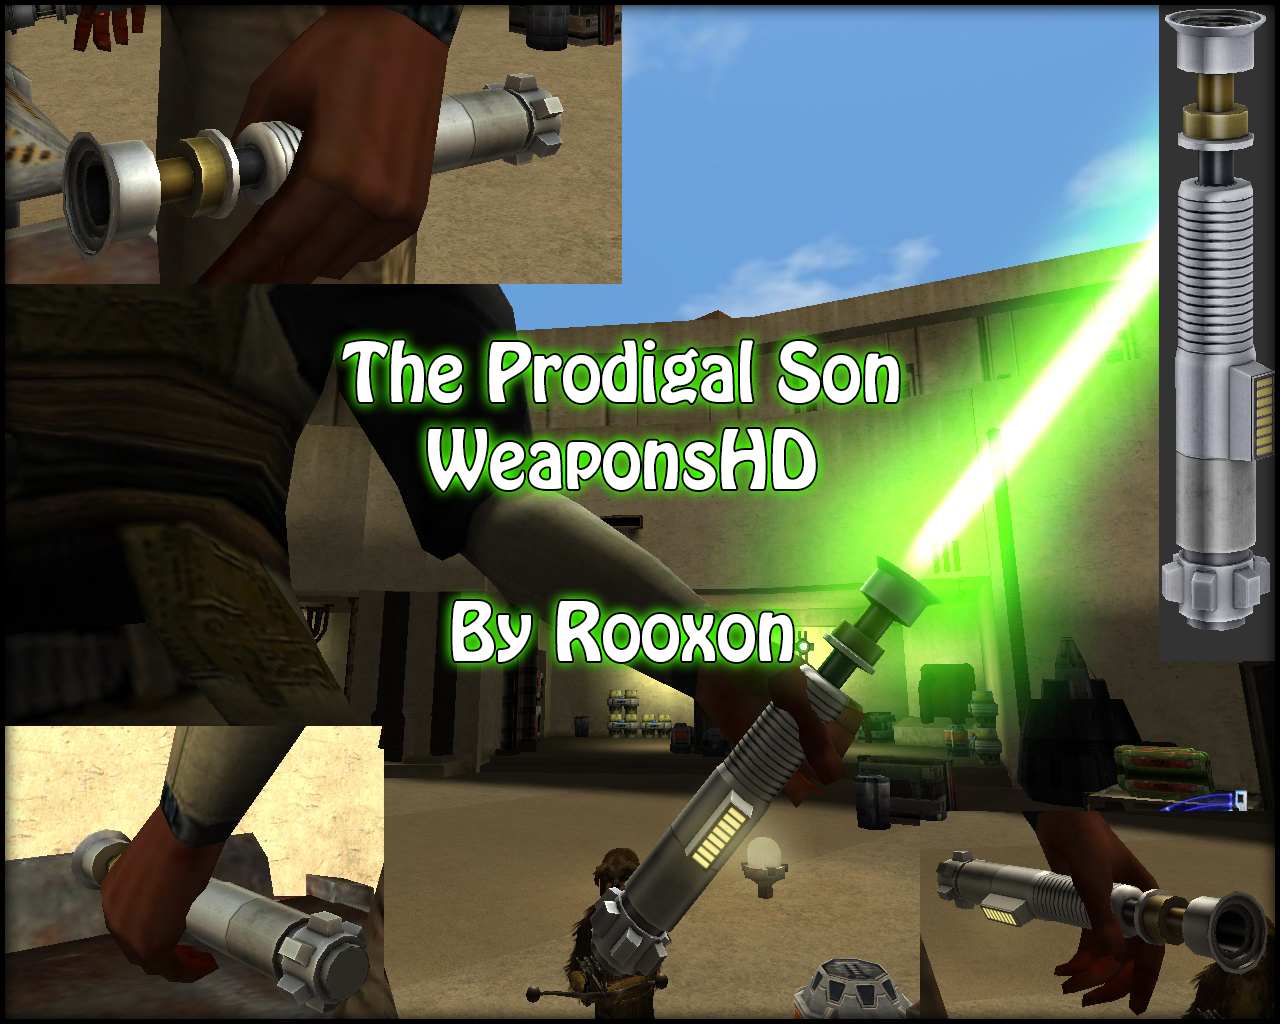 More information about "The Prodigal Son (Luke's Lightsaber) - WeaponsHD"